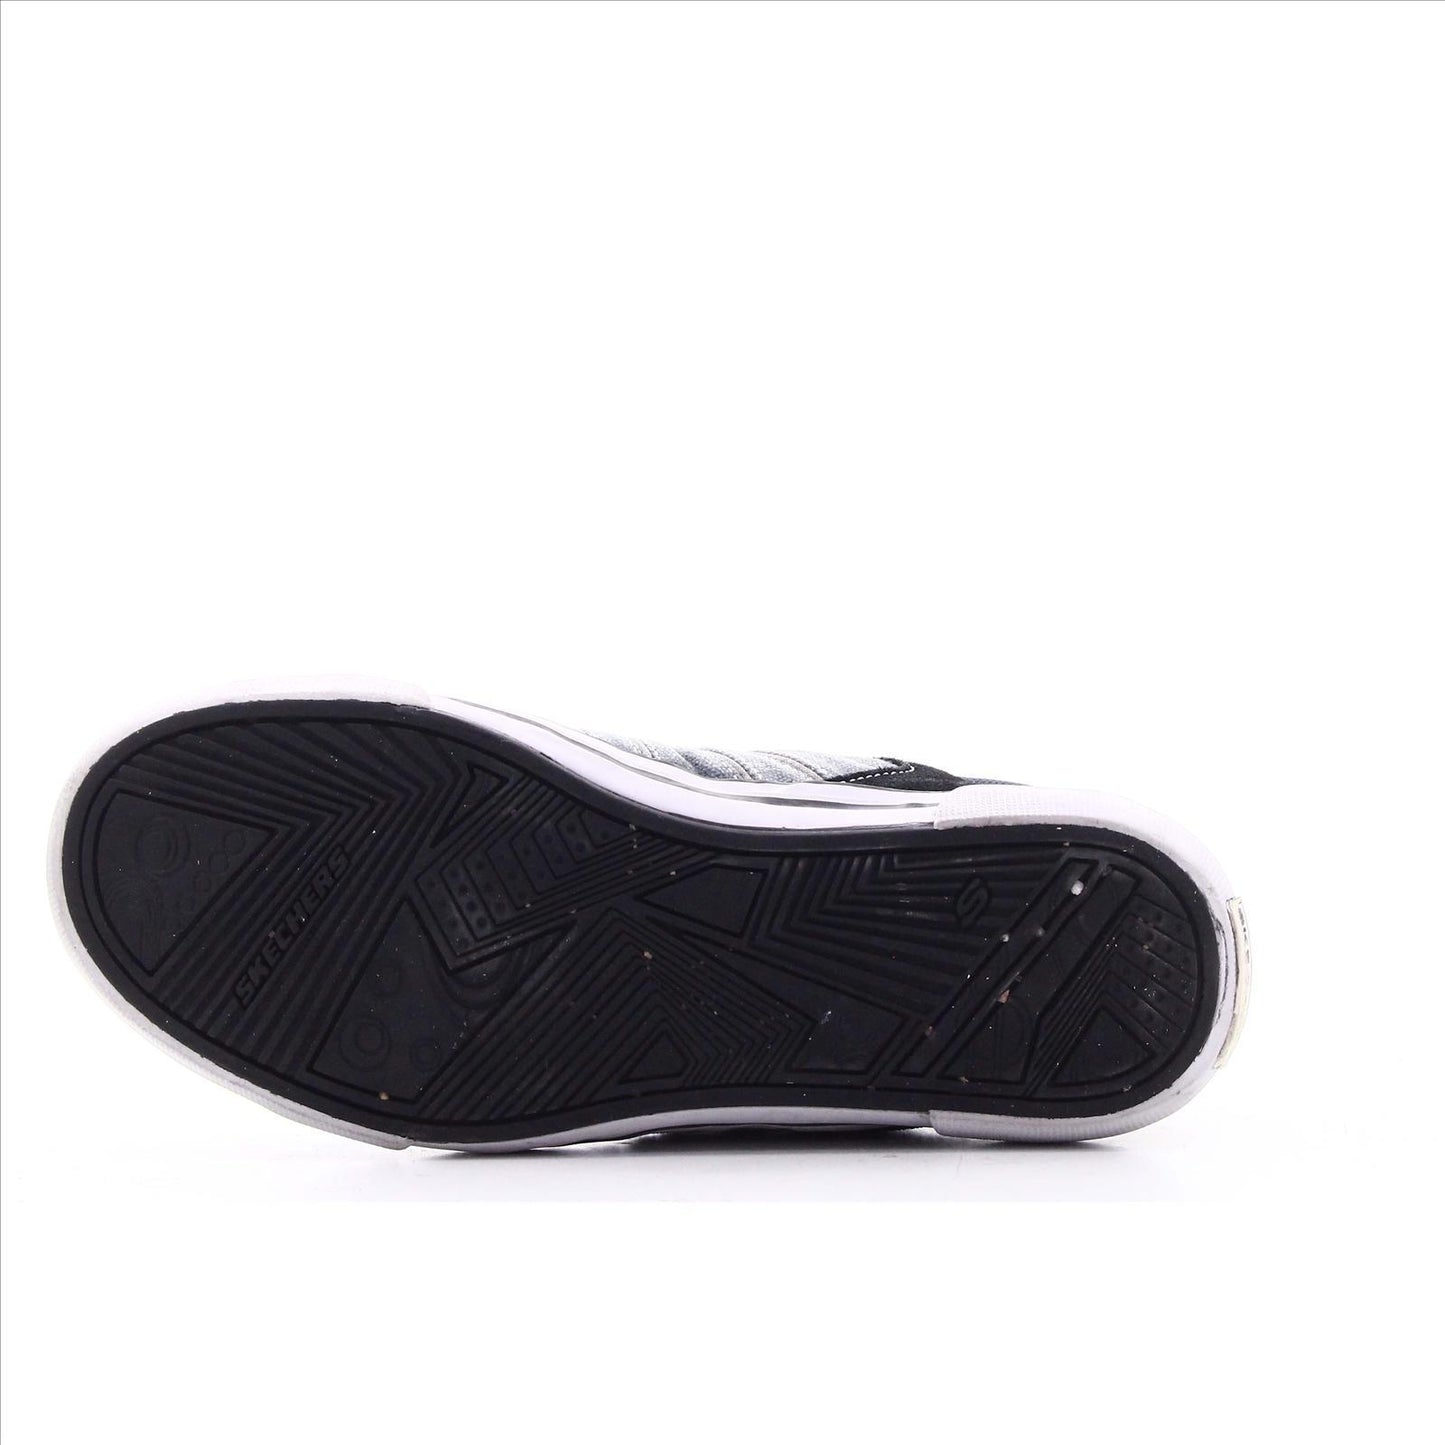 Skechers Relaxed Step